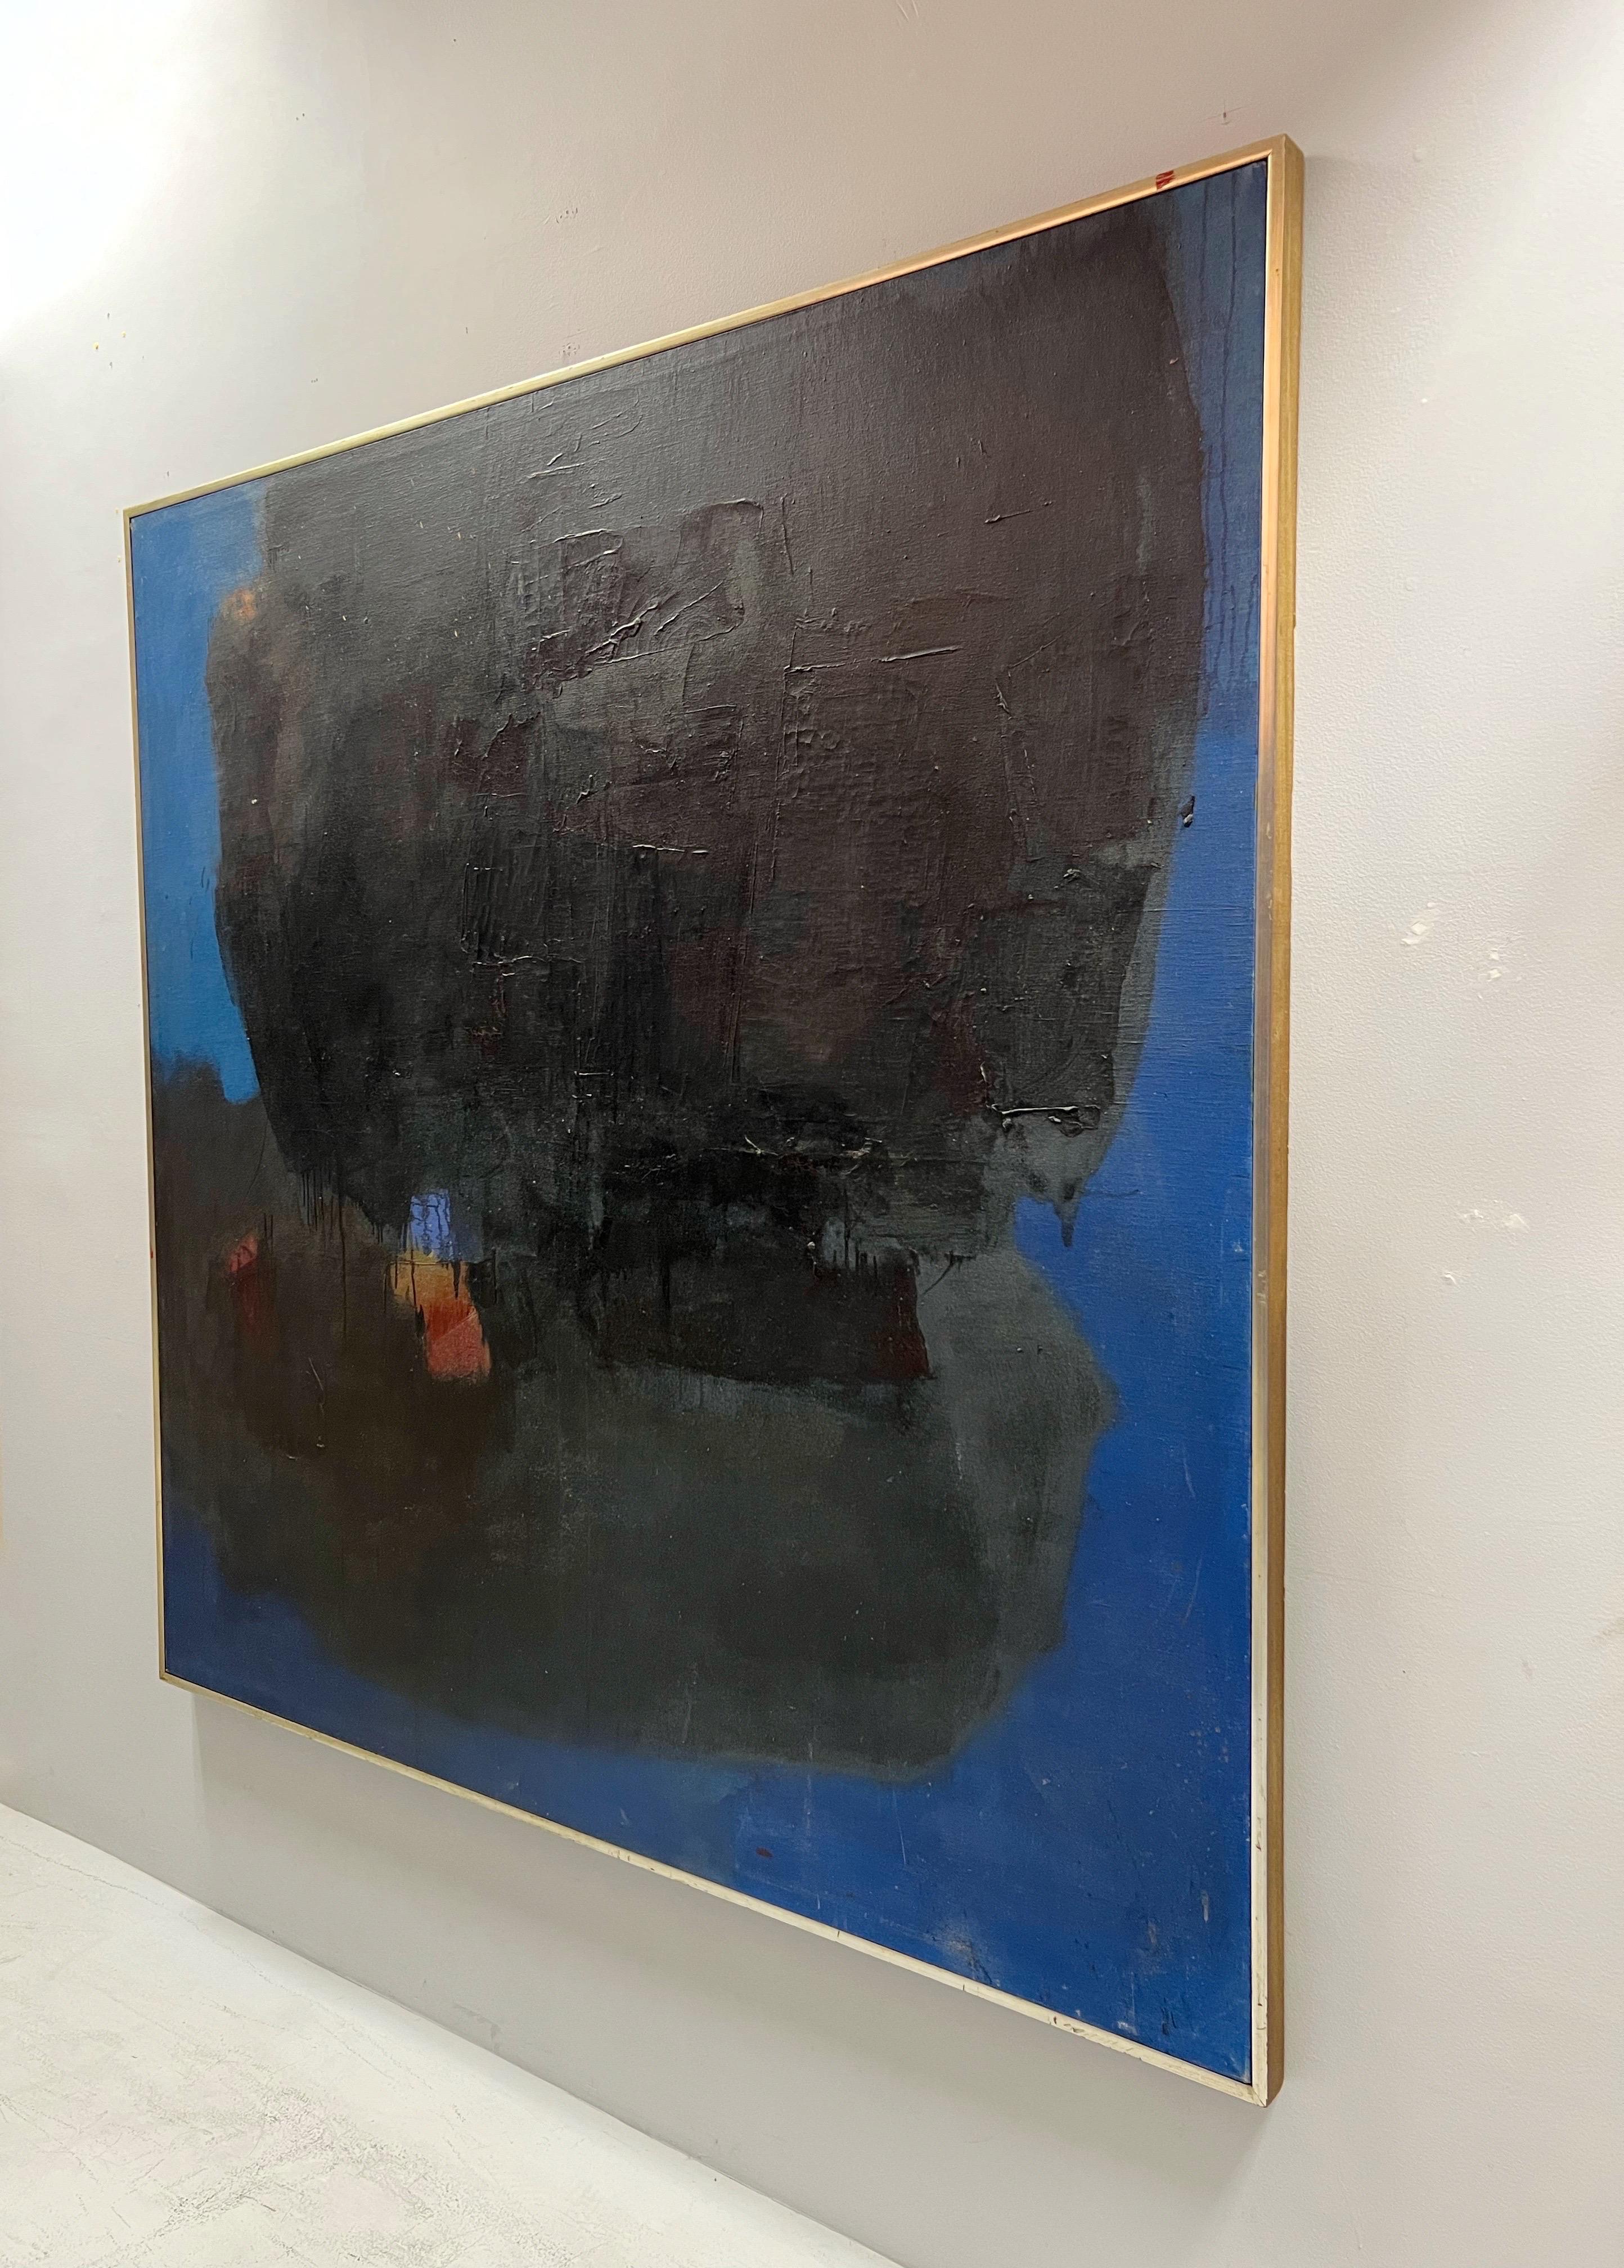 A large abstract expressionist painting on canvas by Korean artist Bong Tae Kim, also known as Kim Bongtae. 

Bong Tae Kim (also known as Kim Bongtae) was born in South Korea in 1937. He graduated from the Dept. of Painting, Seoul National